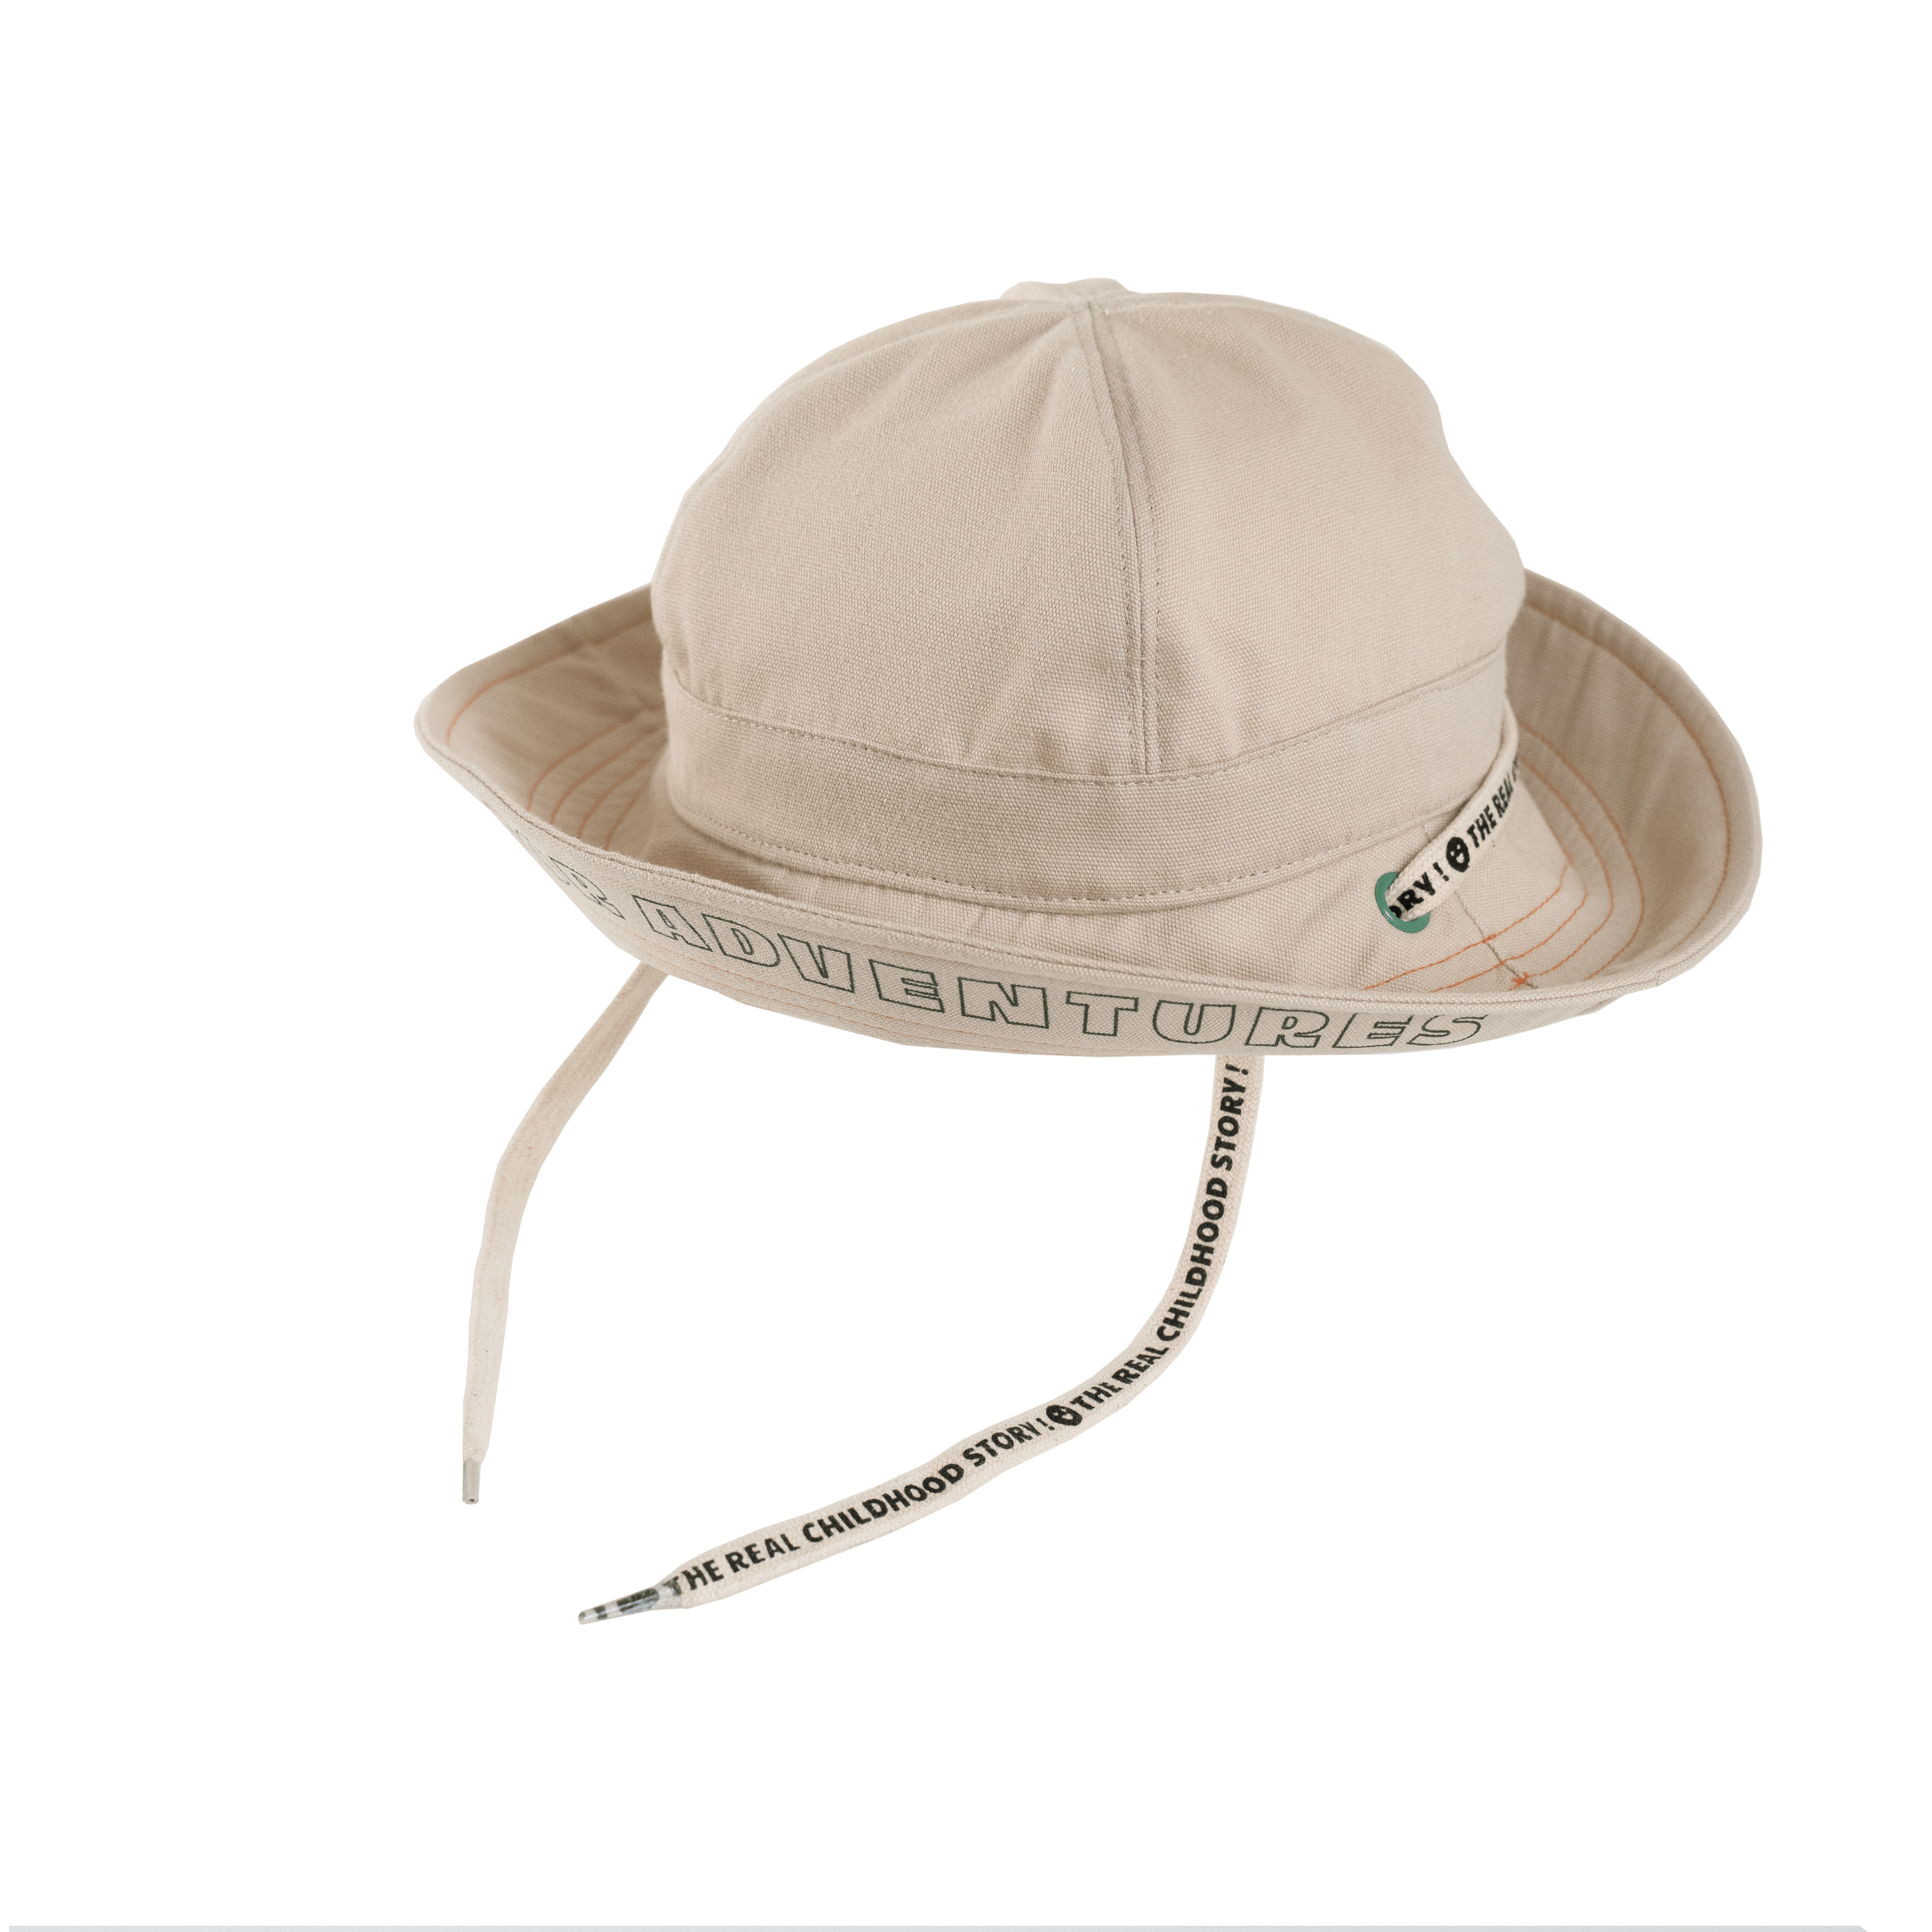 Happymess Kids Hat Ready For Adventures Unisex Safari Hat (Forest Green)